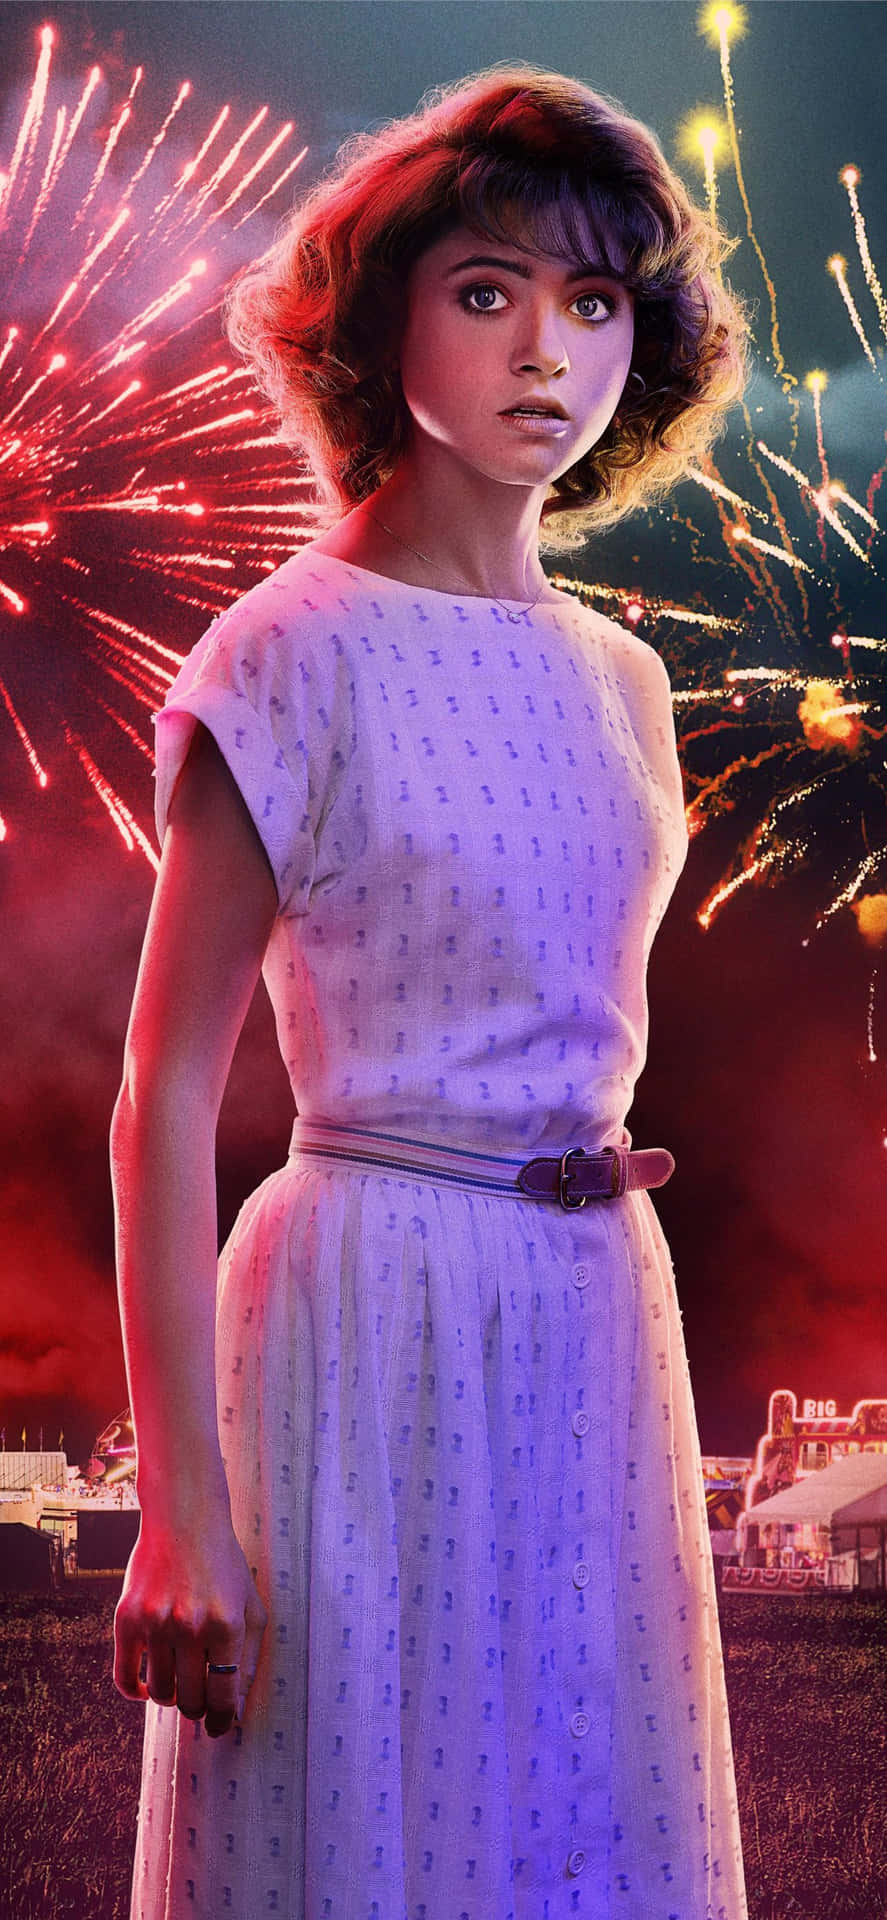 Enjoy being a strong, fearless teenage girl with Stranger Things Girly Wallpaper